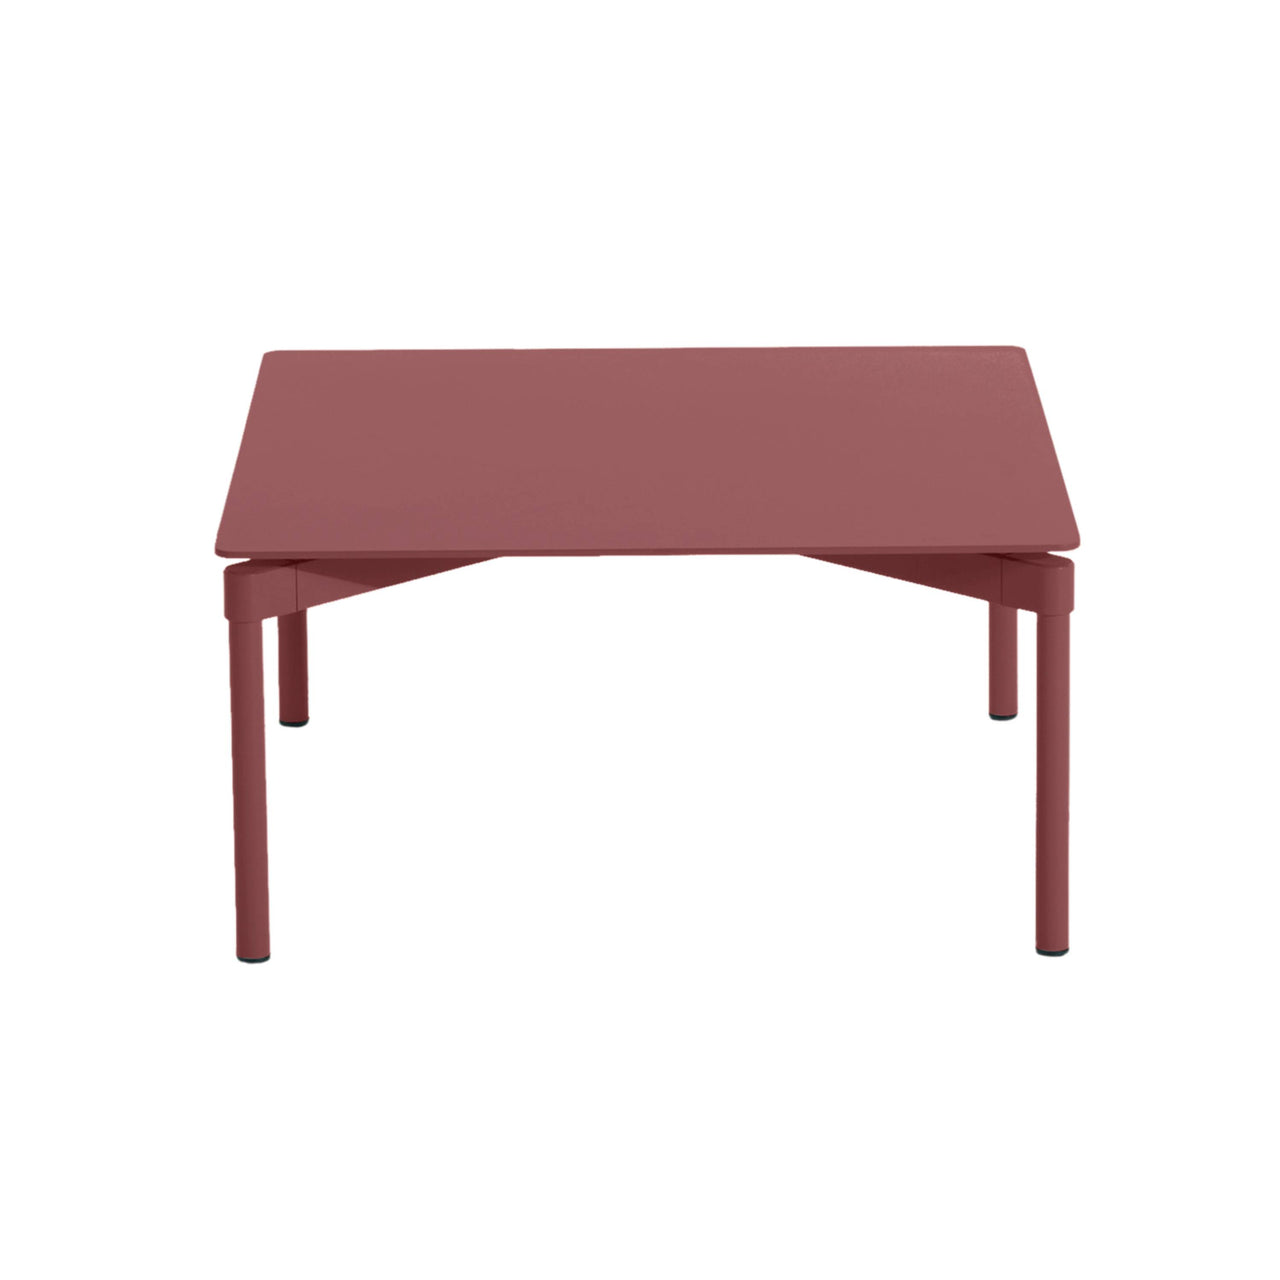 Fromme Coffee Table: Brown Red